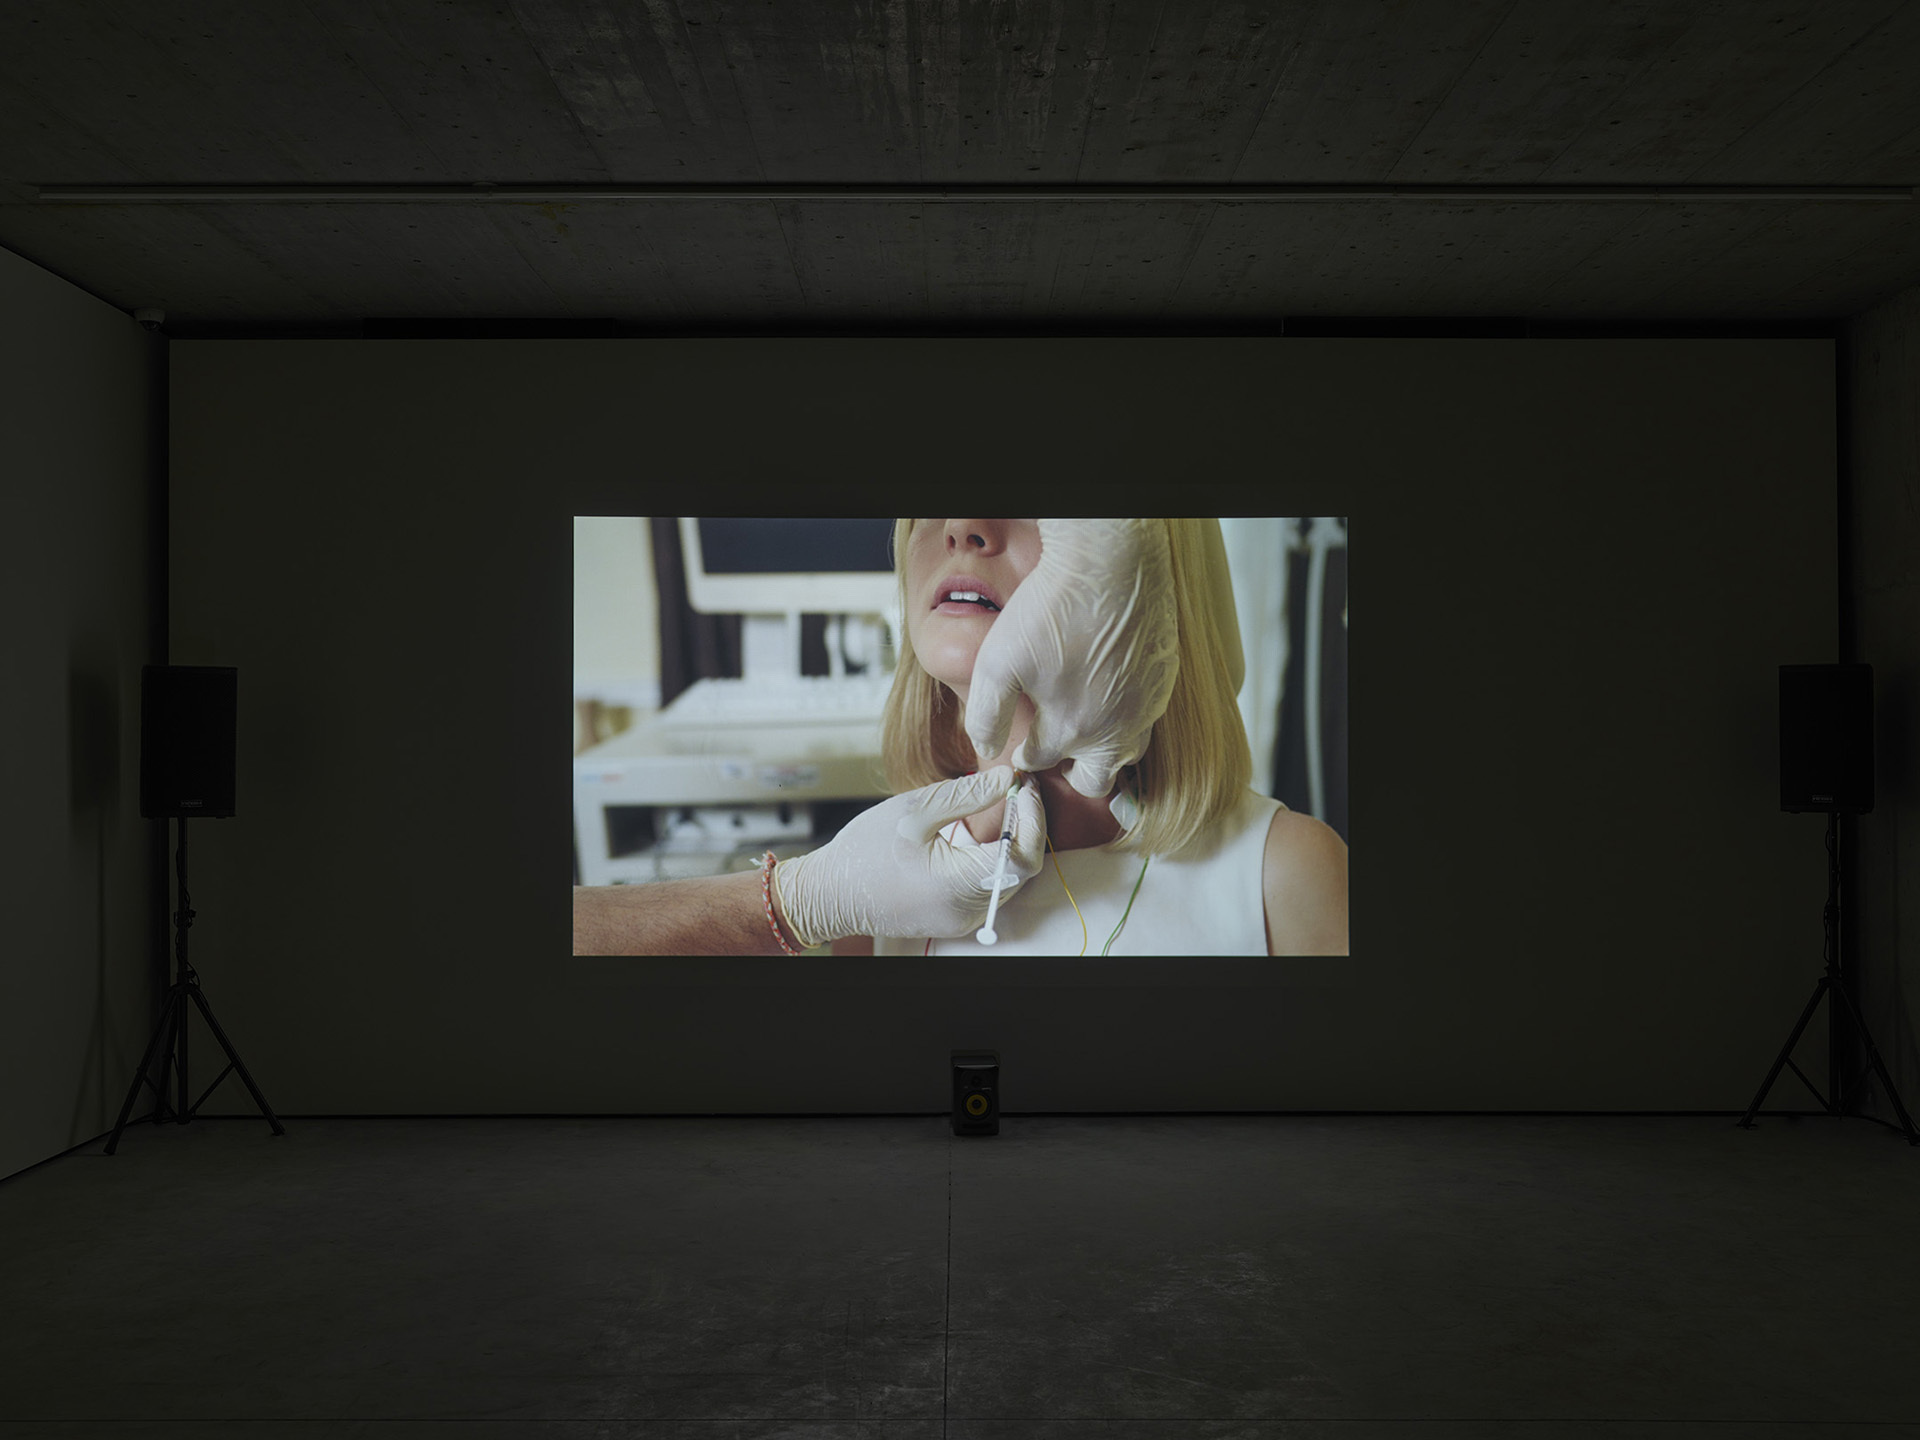 Marianna Simnett, The Needle and the Larynx, 2016, Digital HD video with surround sound